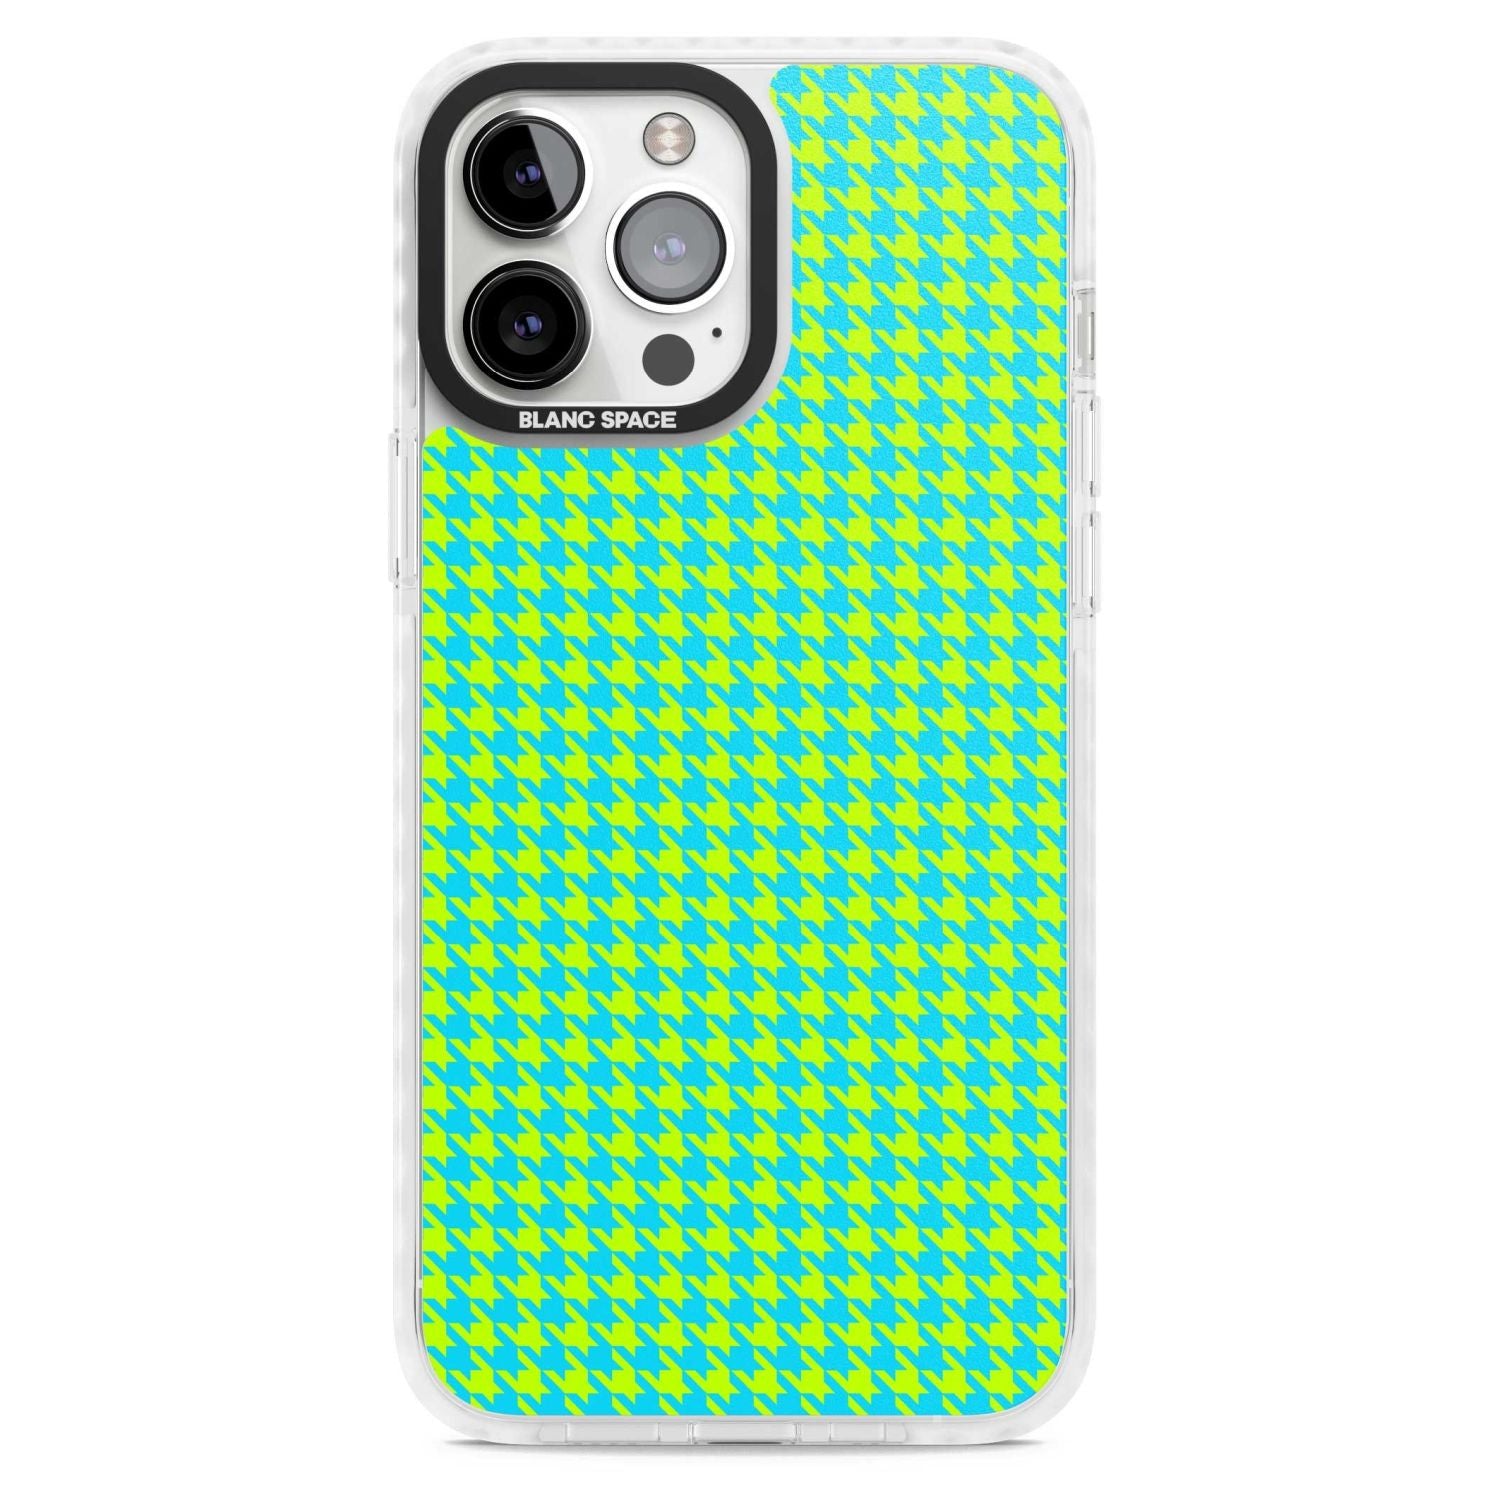 Neon Lime & Turquoise Houndstooth Pattern